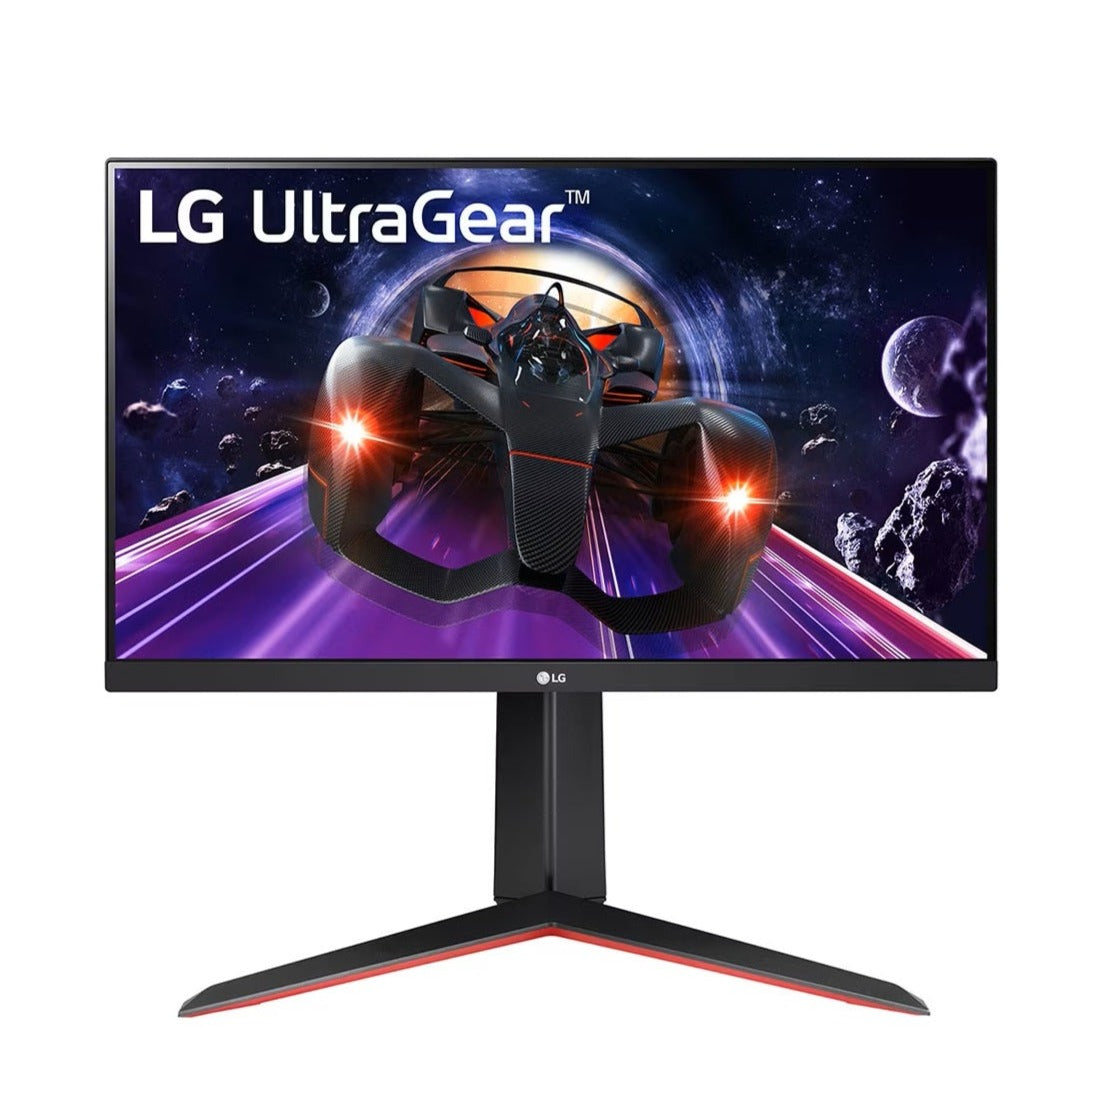 LG 24GN65R-B 24” UltraGear™ Full HD IPS 1ms (GtG) Gaming Monitor with NVIDIA® G-SYNC® Compatible